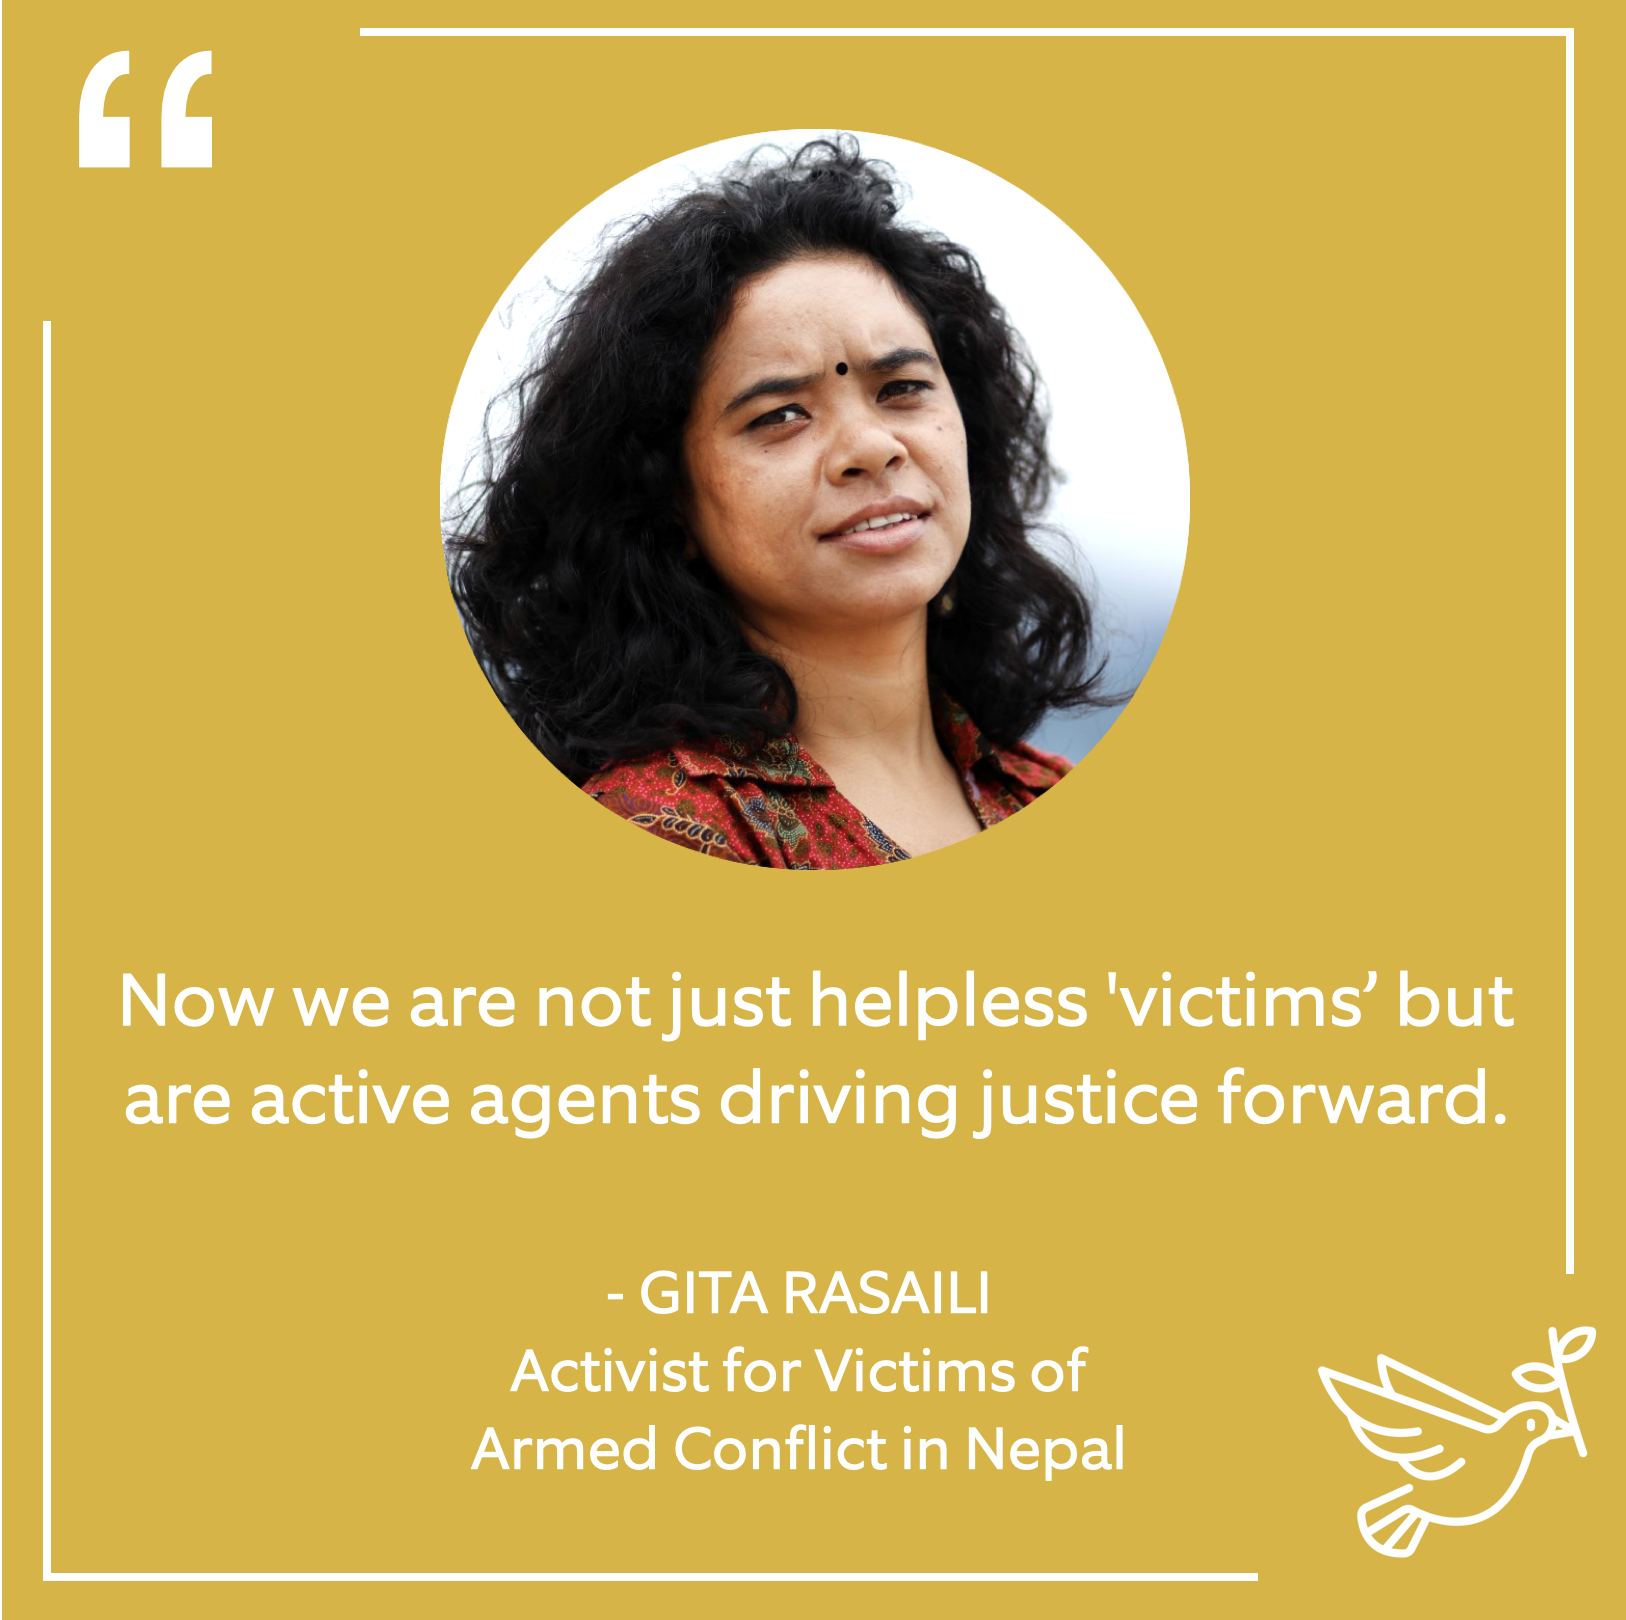 Gita Rasaili - Activist for the Victims of Armed Conflict in Nepal.